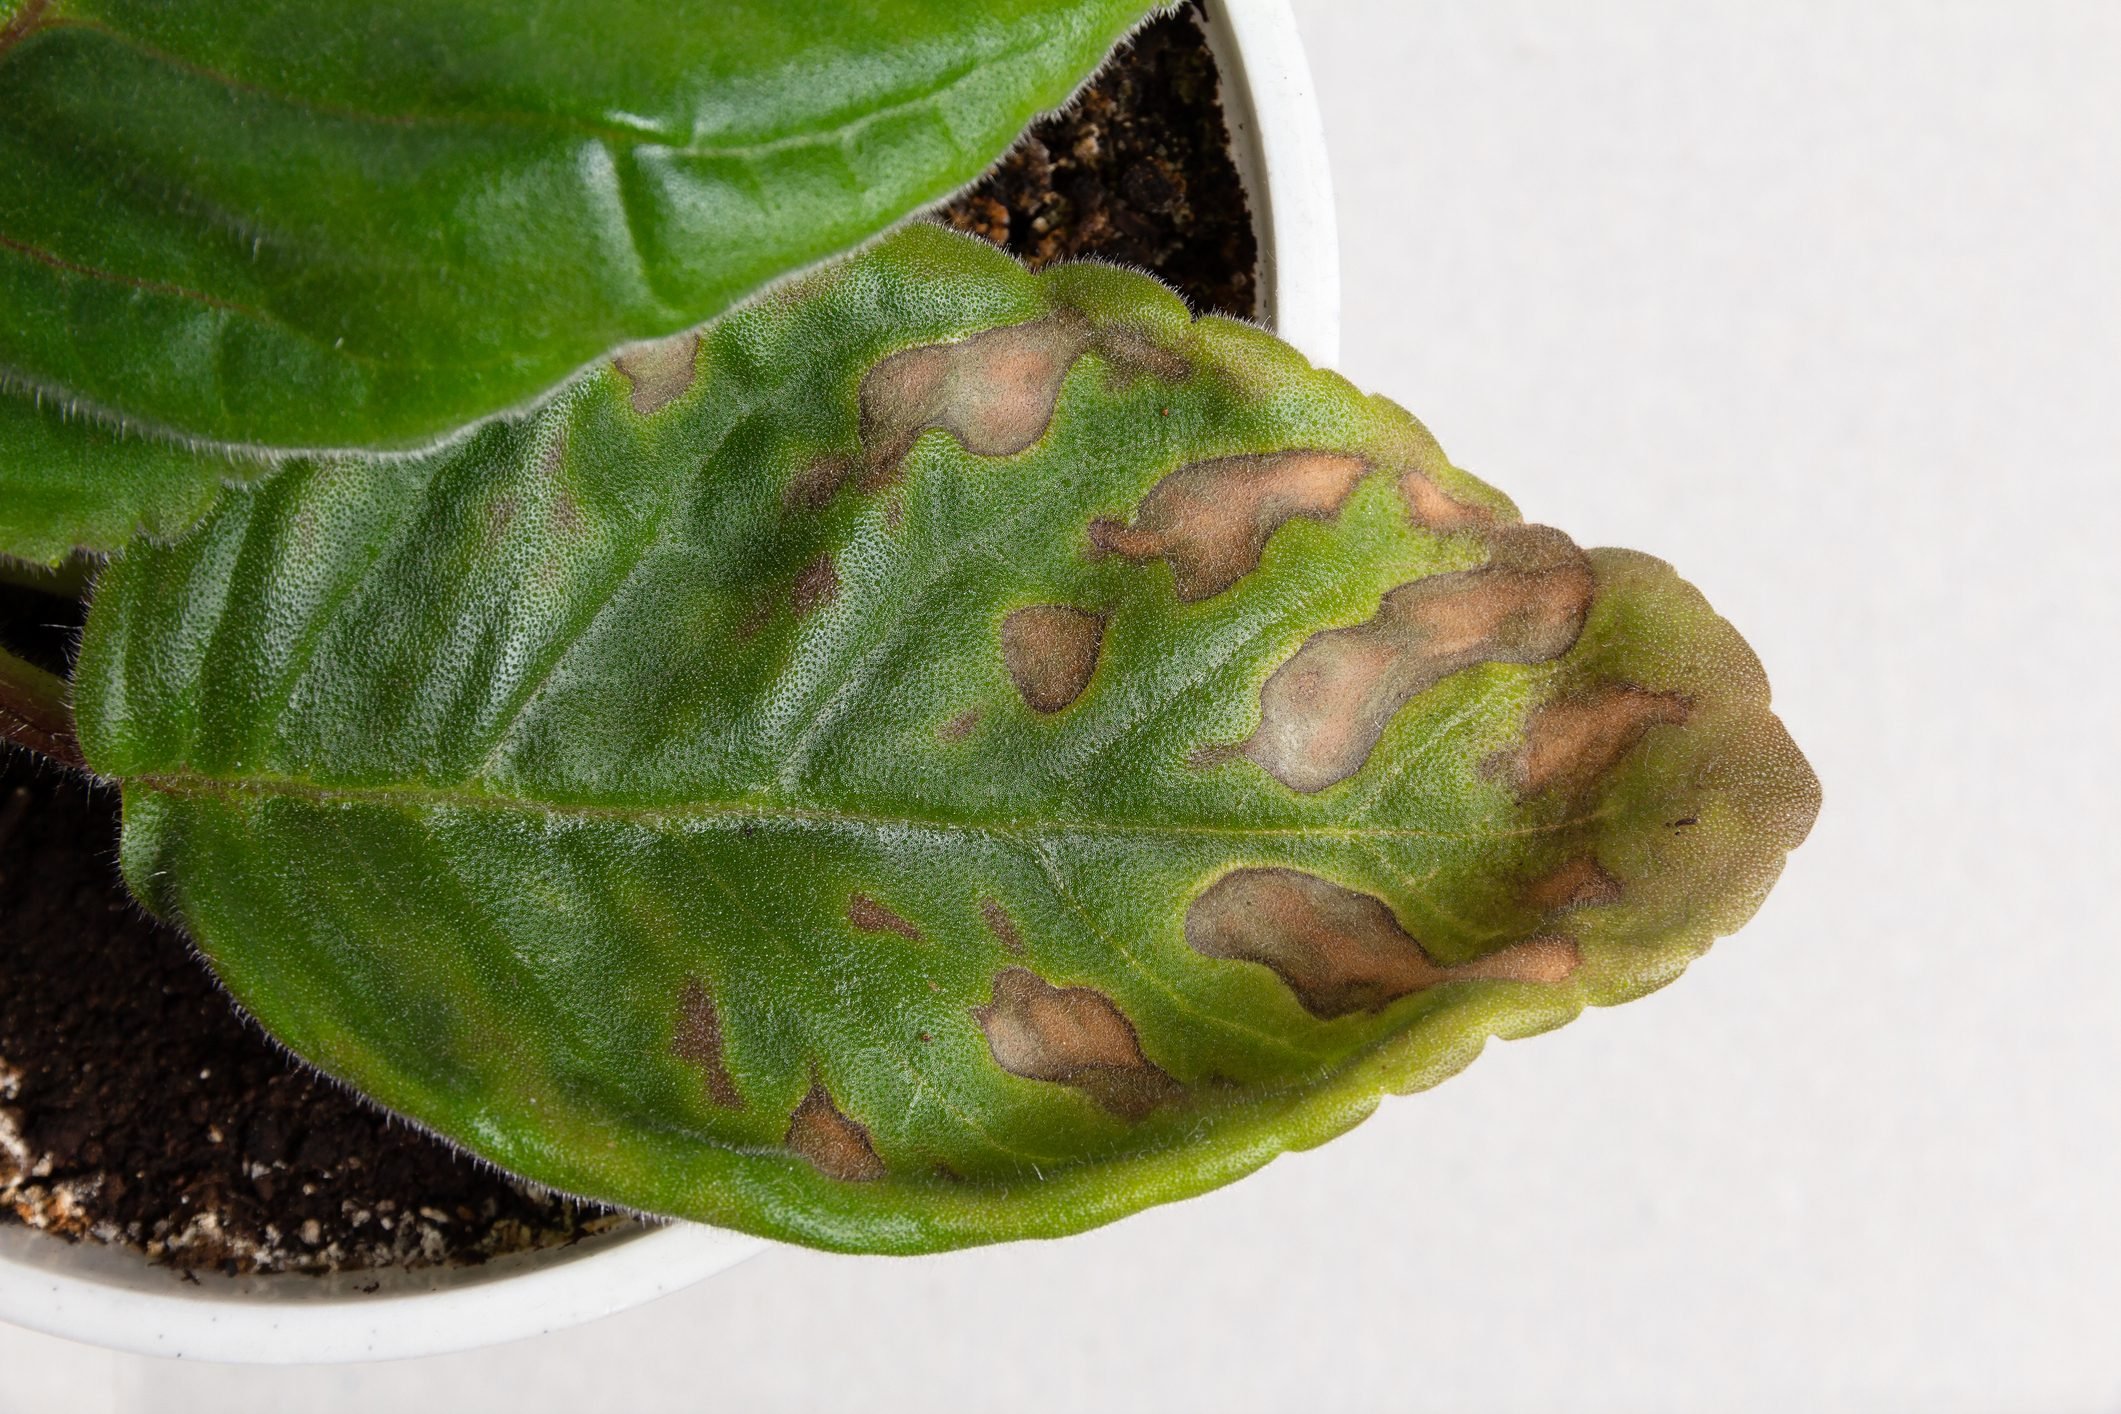 Stop What's Causing Brown Spots on Fiddle Leaf Fig Leaves Quickly